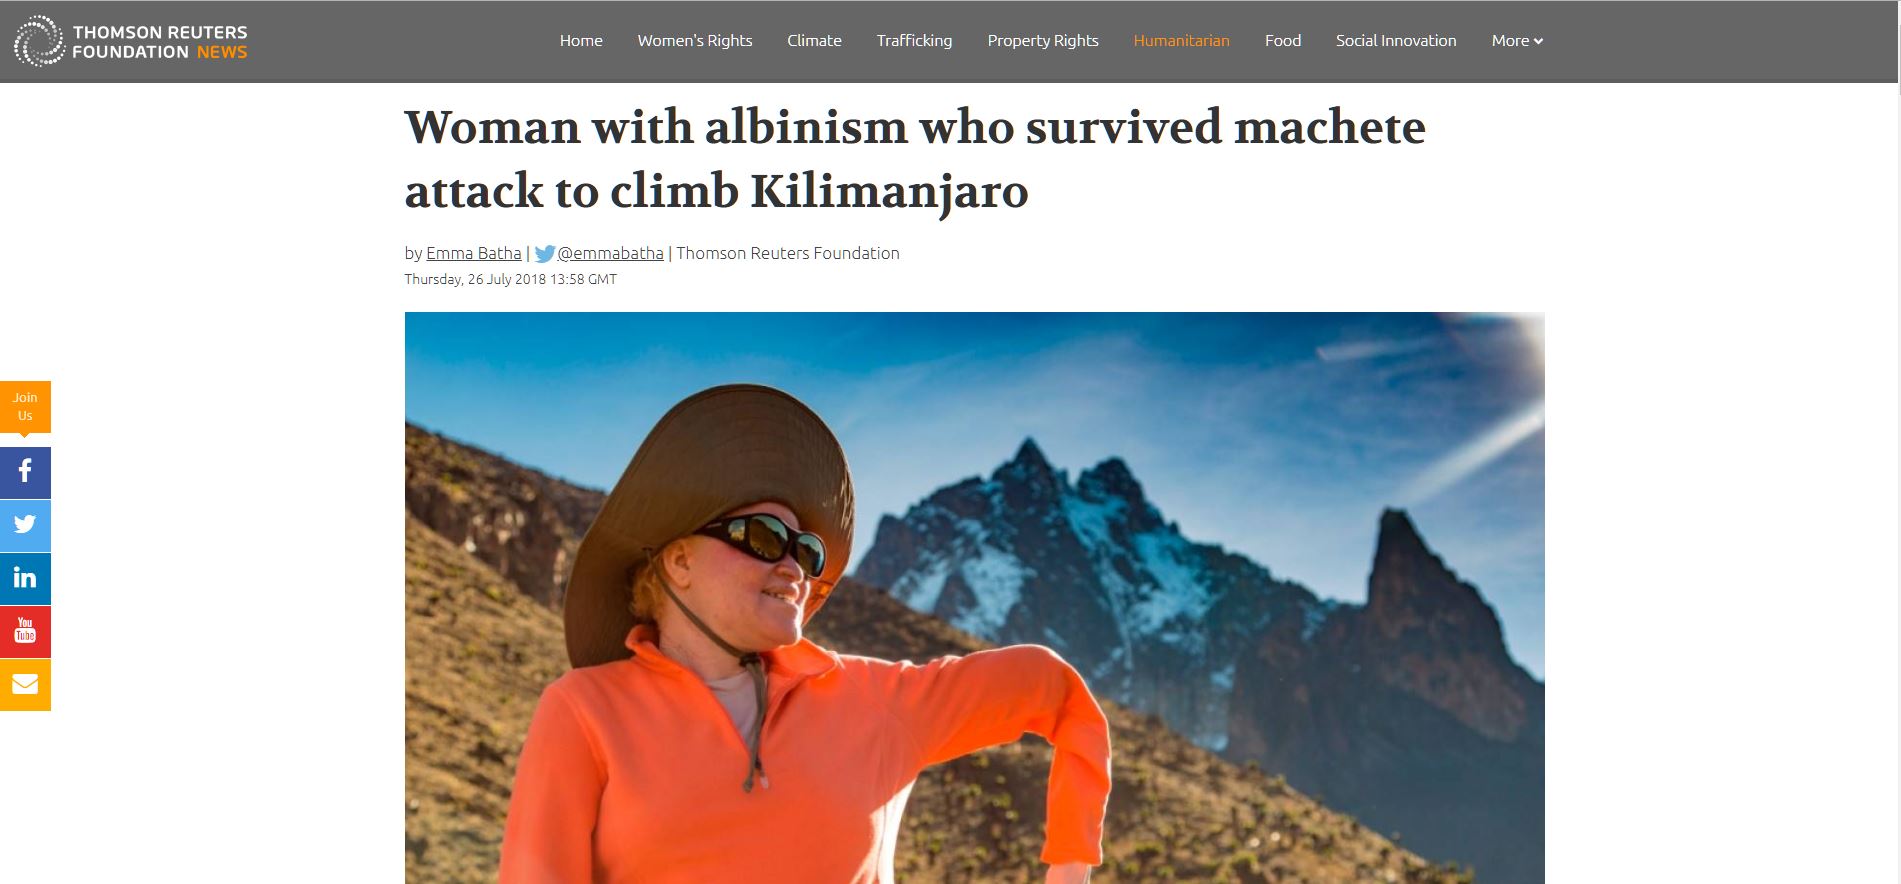 Woman with albinism who survived machete attack to climb Kilimanjaro